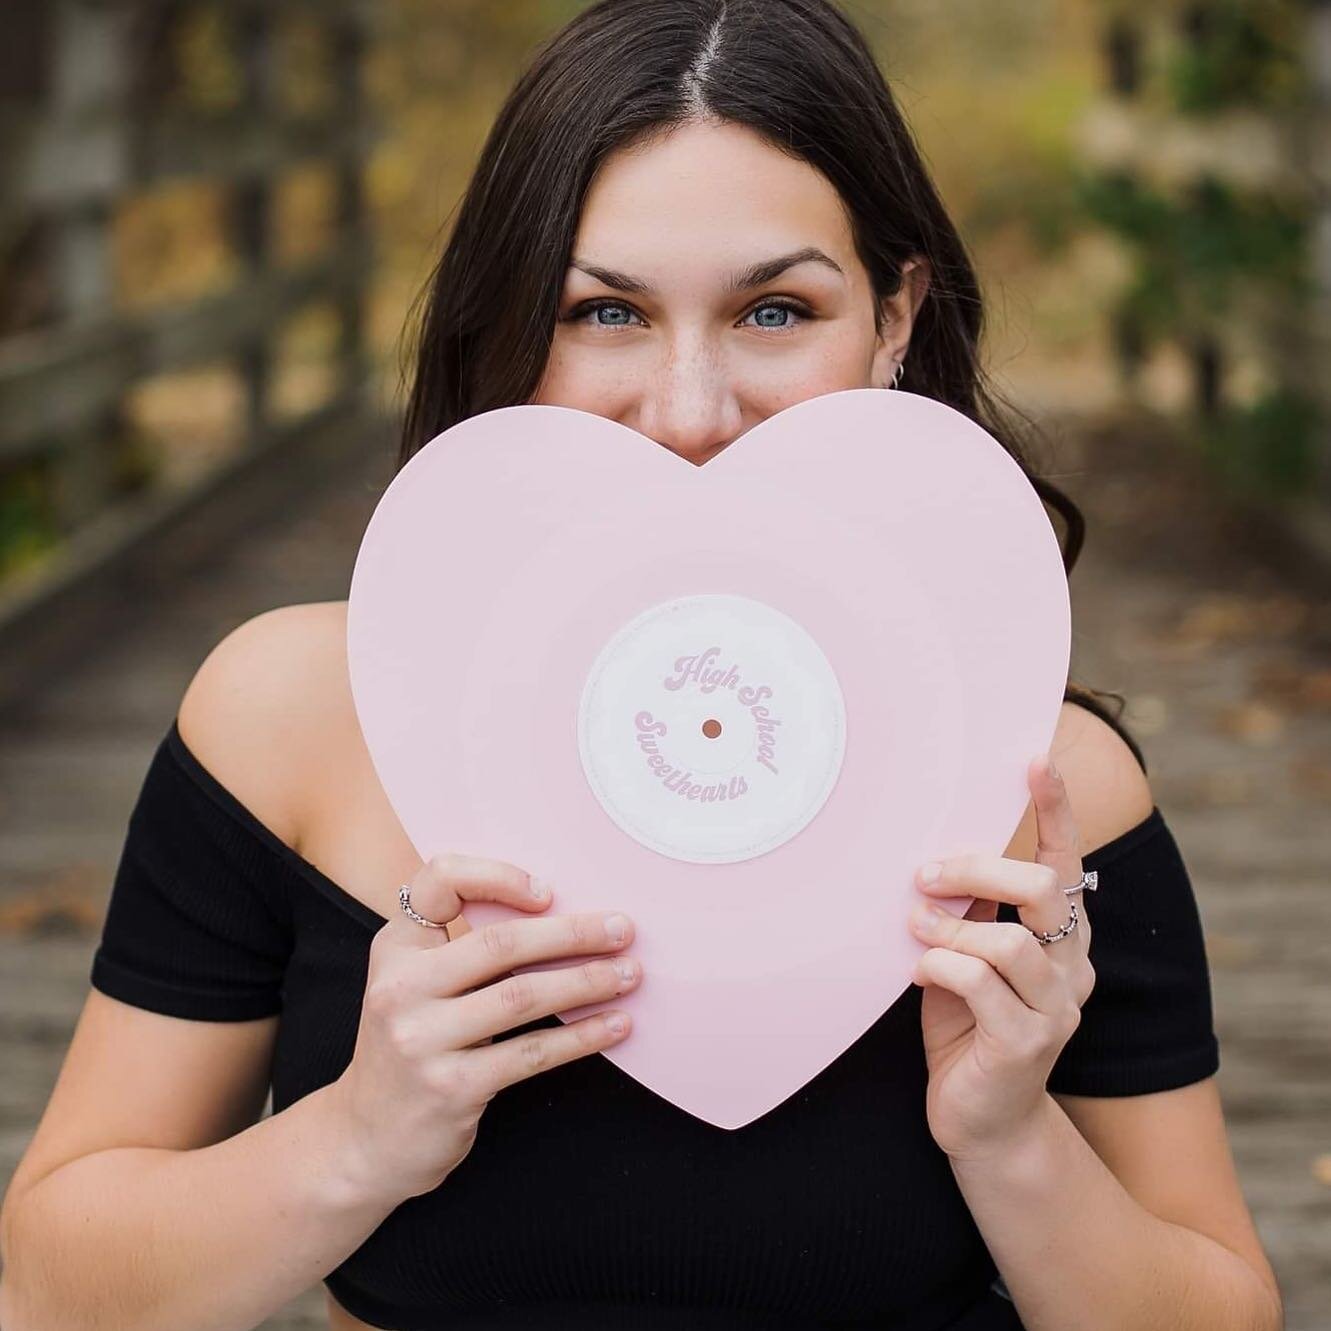 &ldquo;The key to a woman&rsquo;s heart is hidden in her playlist&rdquo;
I agree! Although I have so many lists. What do you think? I&rsquo;ve been playing my VDay list all day. It&rsquo;s very eclectic and not exactly traditional love songs. What&rs